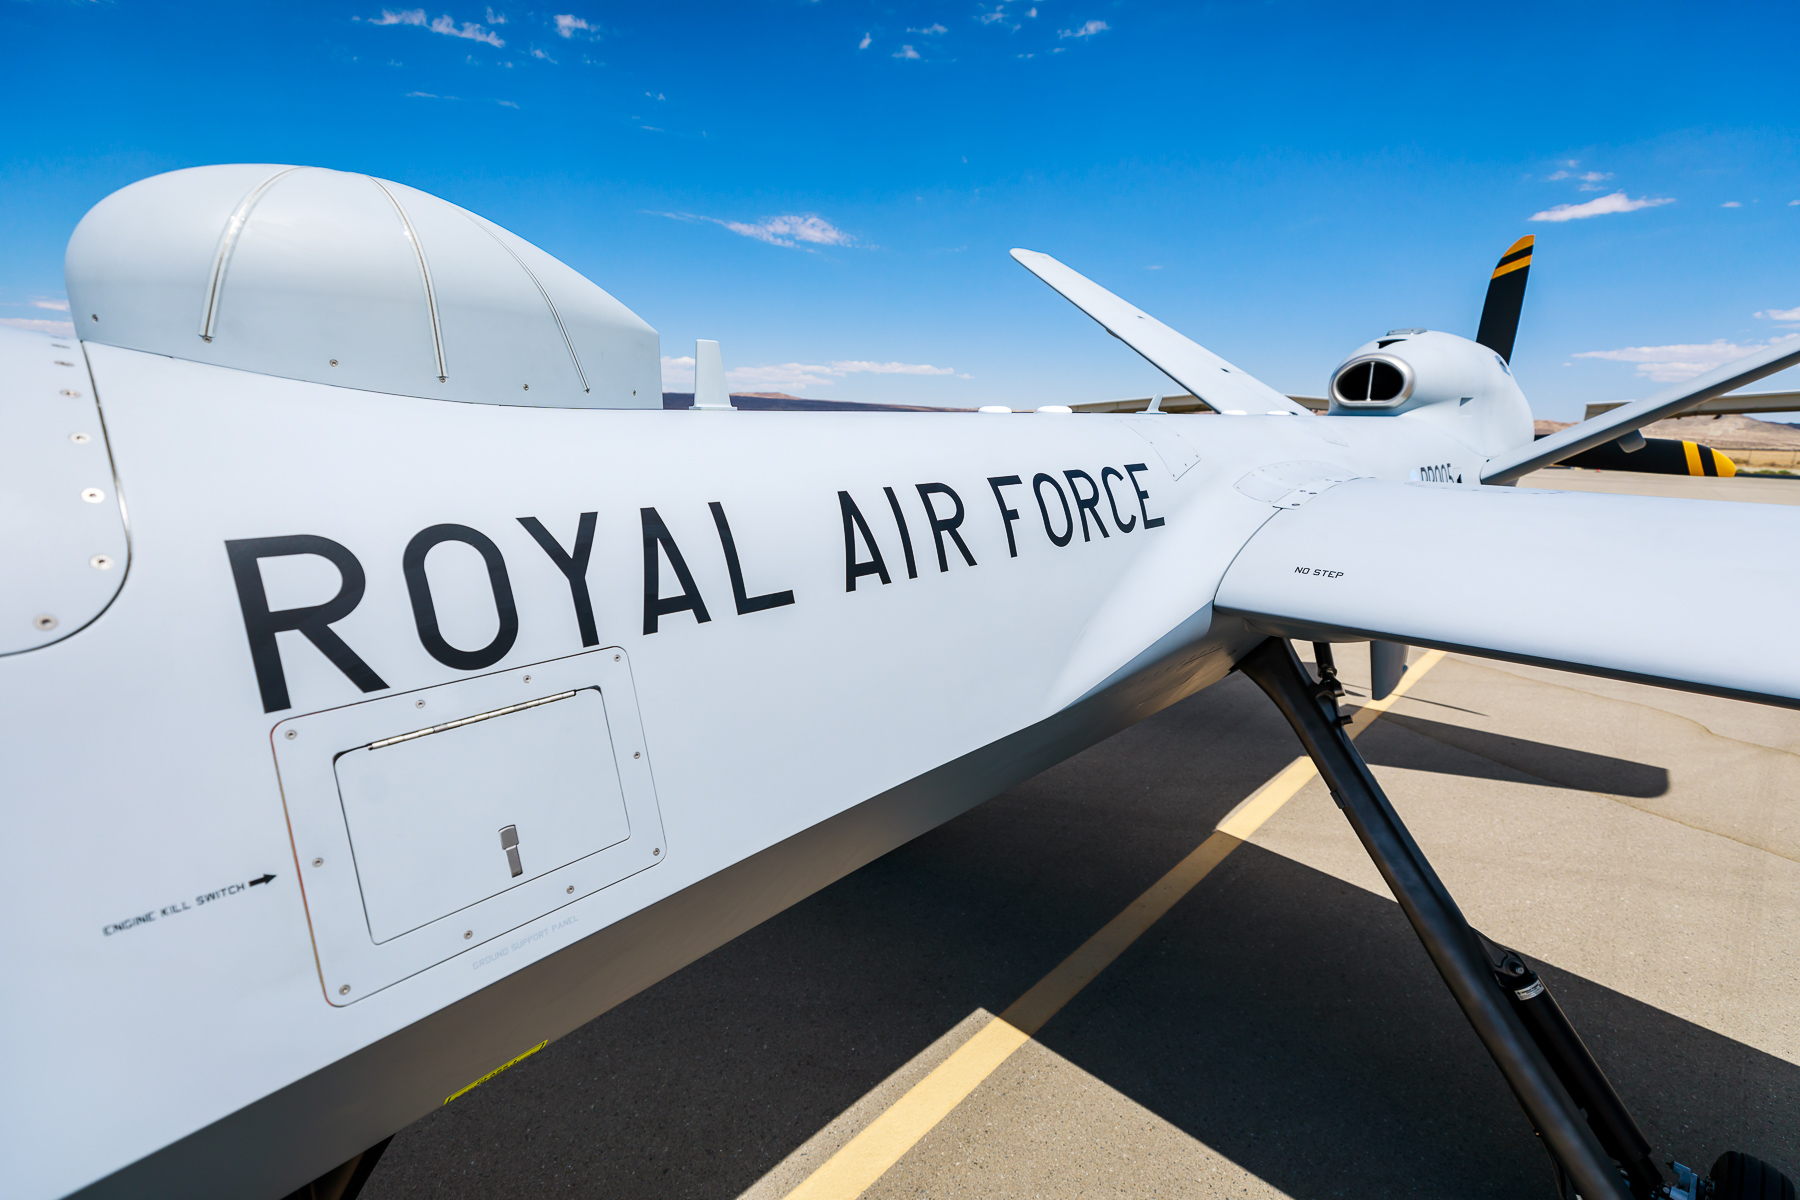 Image shows the words Royal Air Force up close on the side of an RAF Protector aircraft while on the ground.